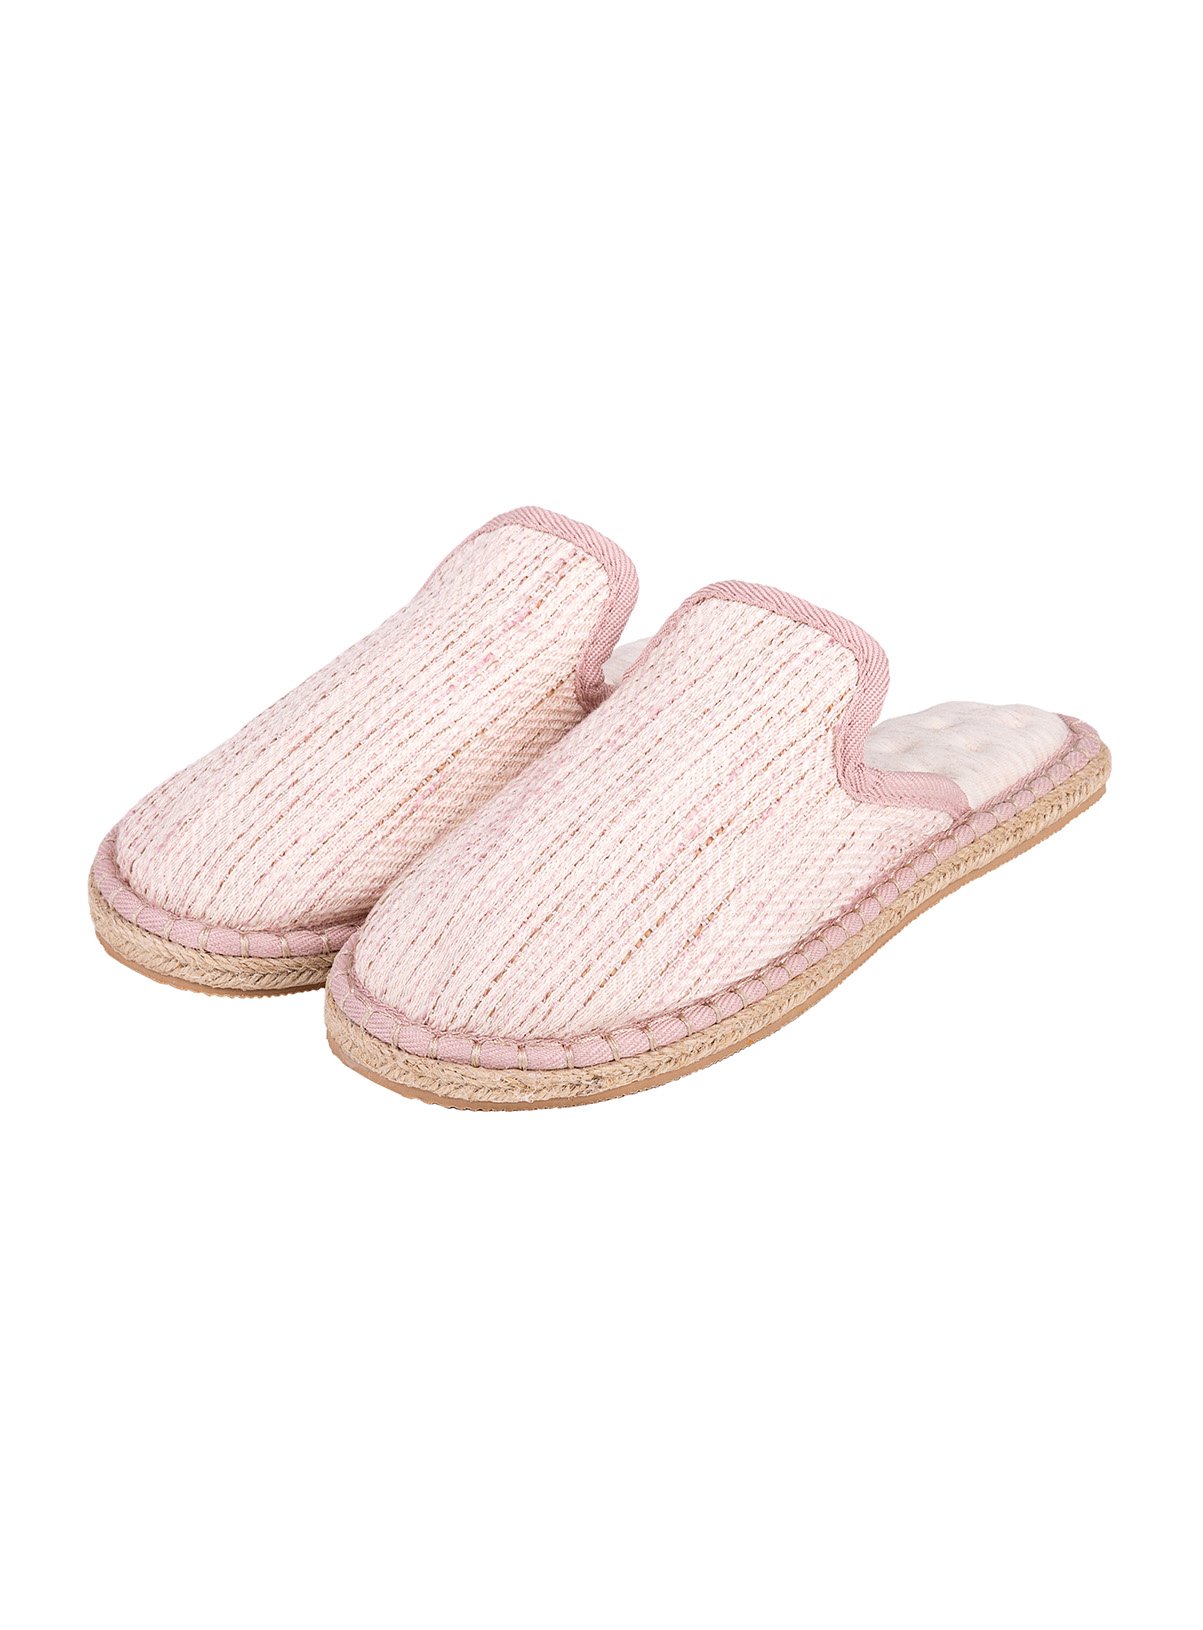 pillowstep slippers